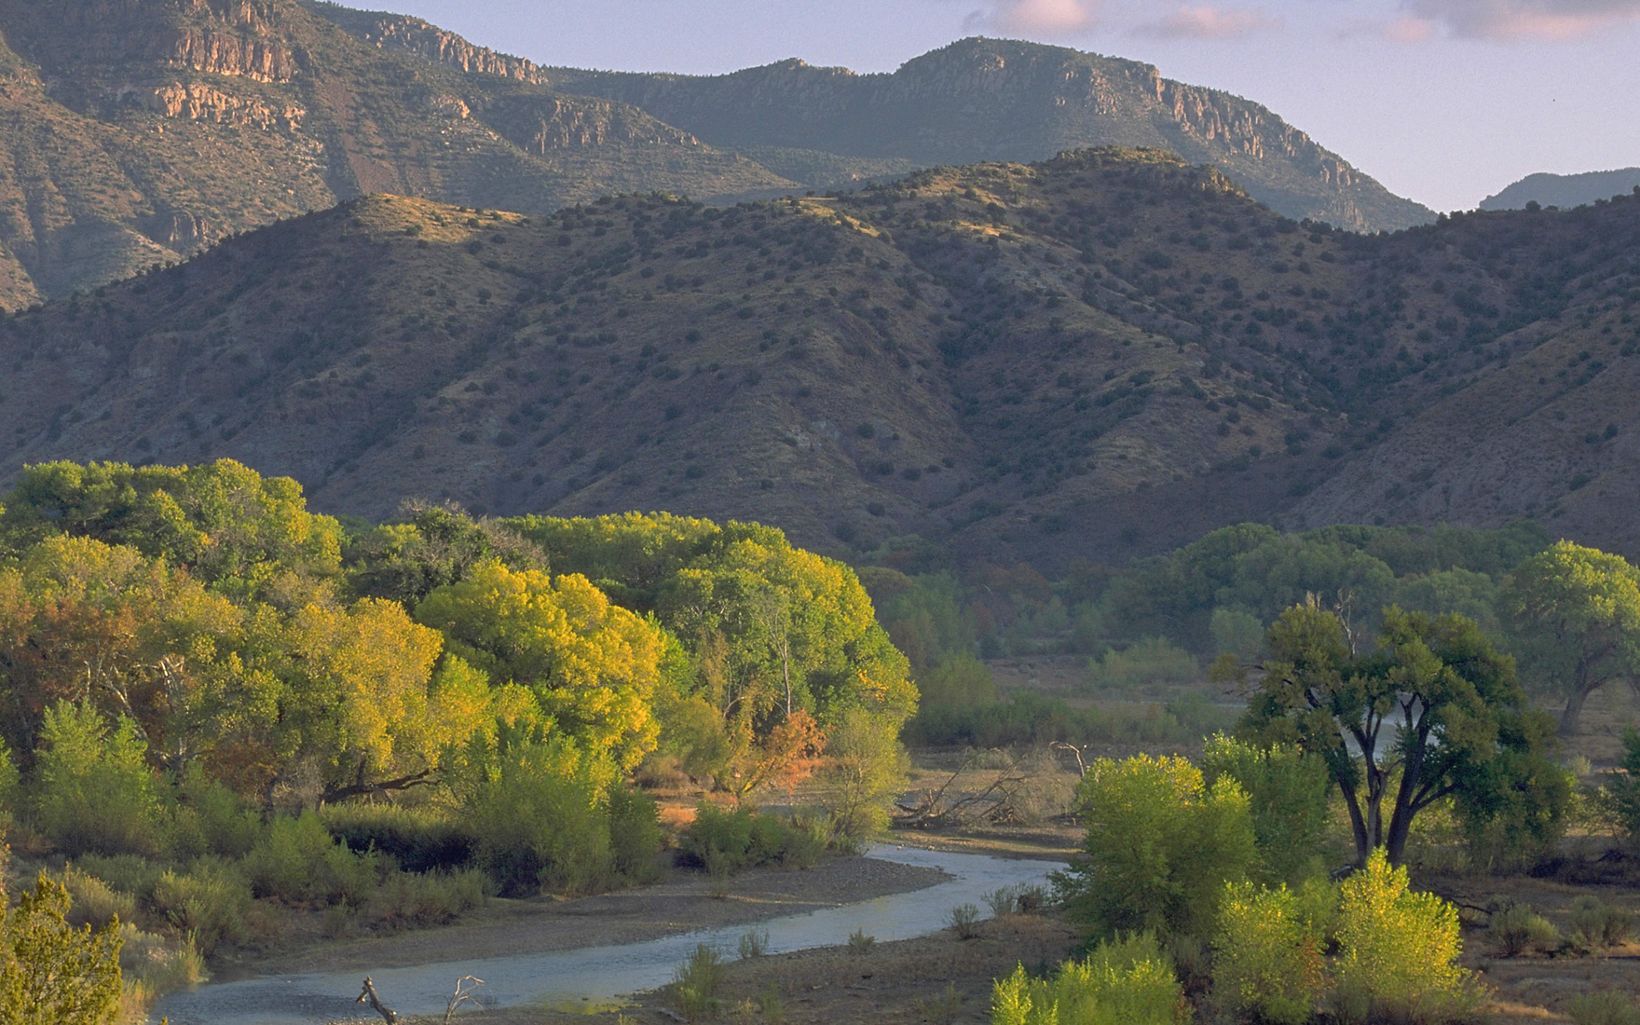 Fall colors along the Gila River with hills in the background.